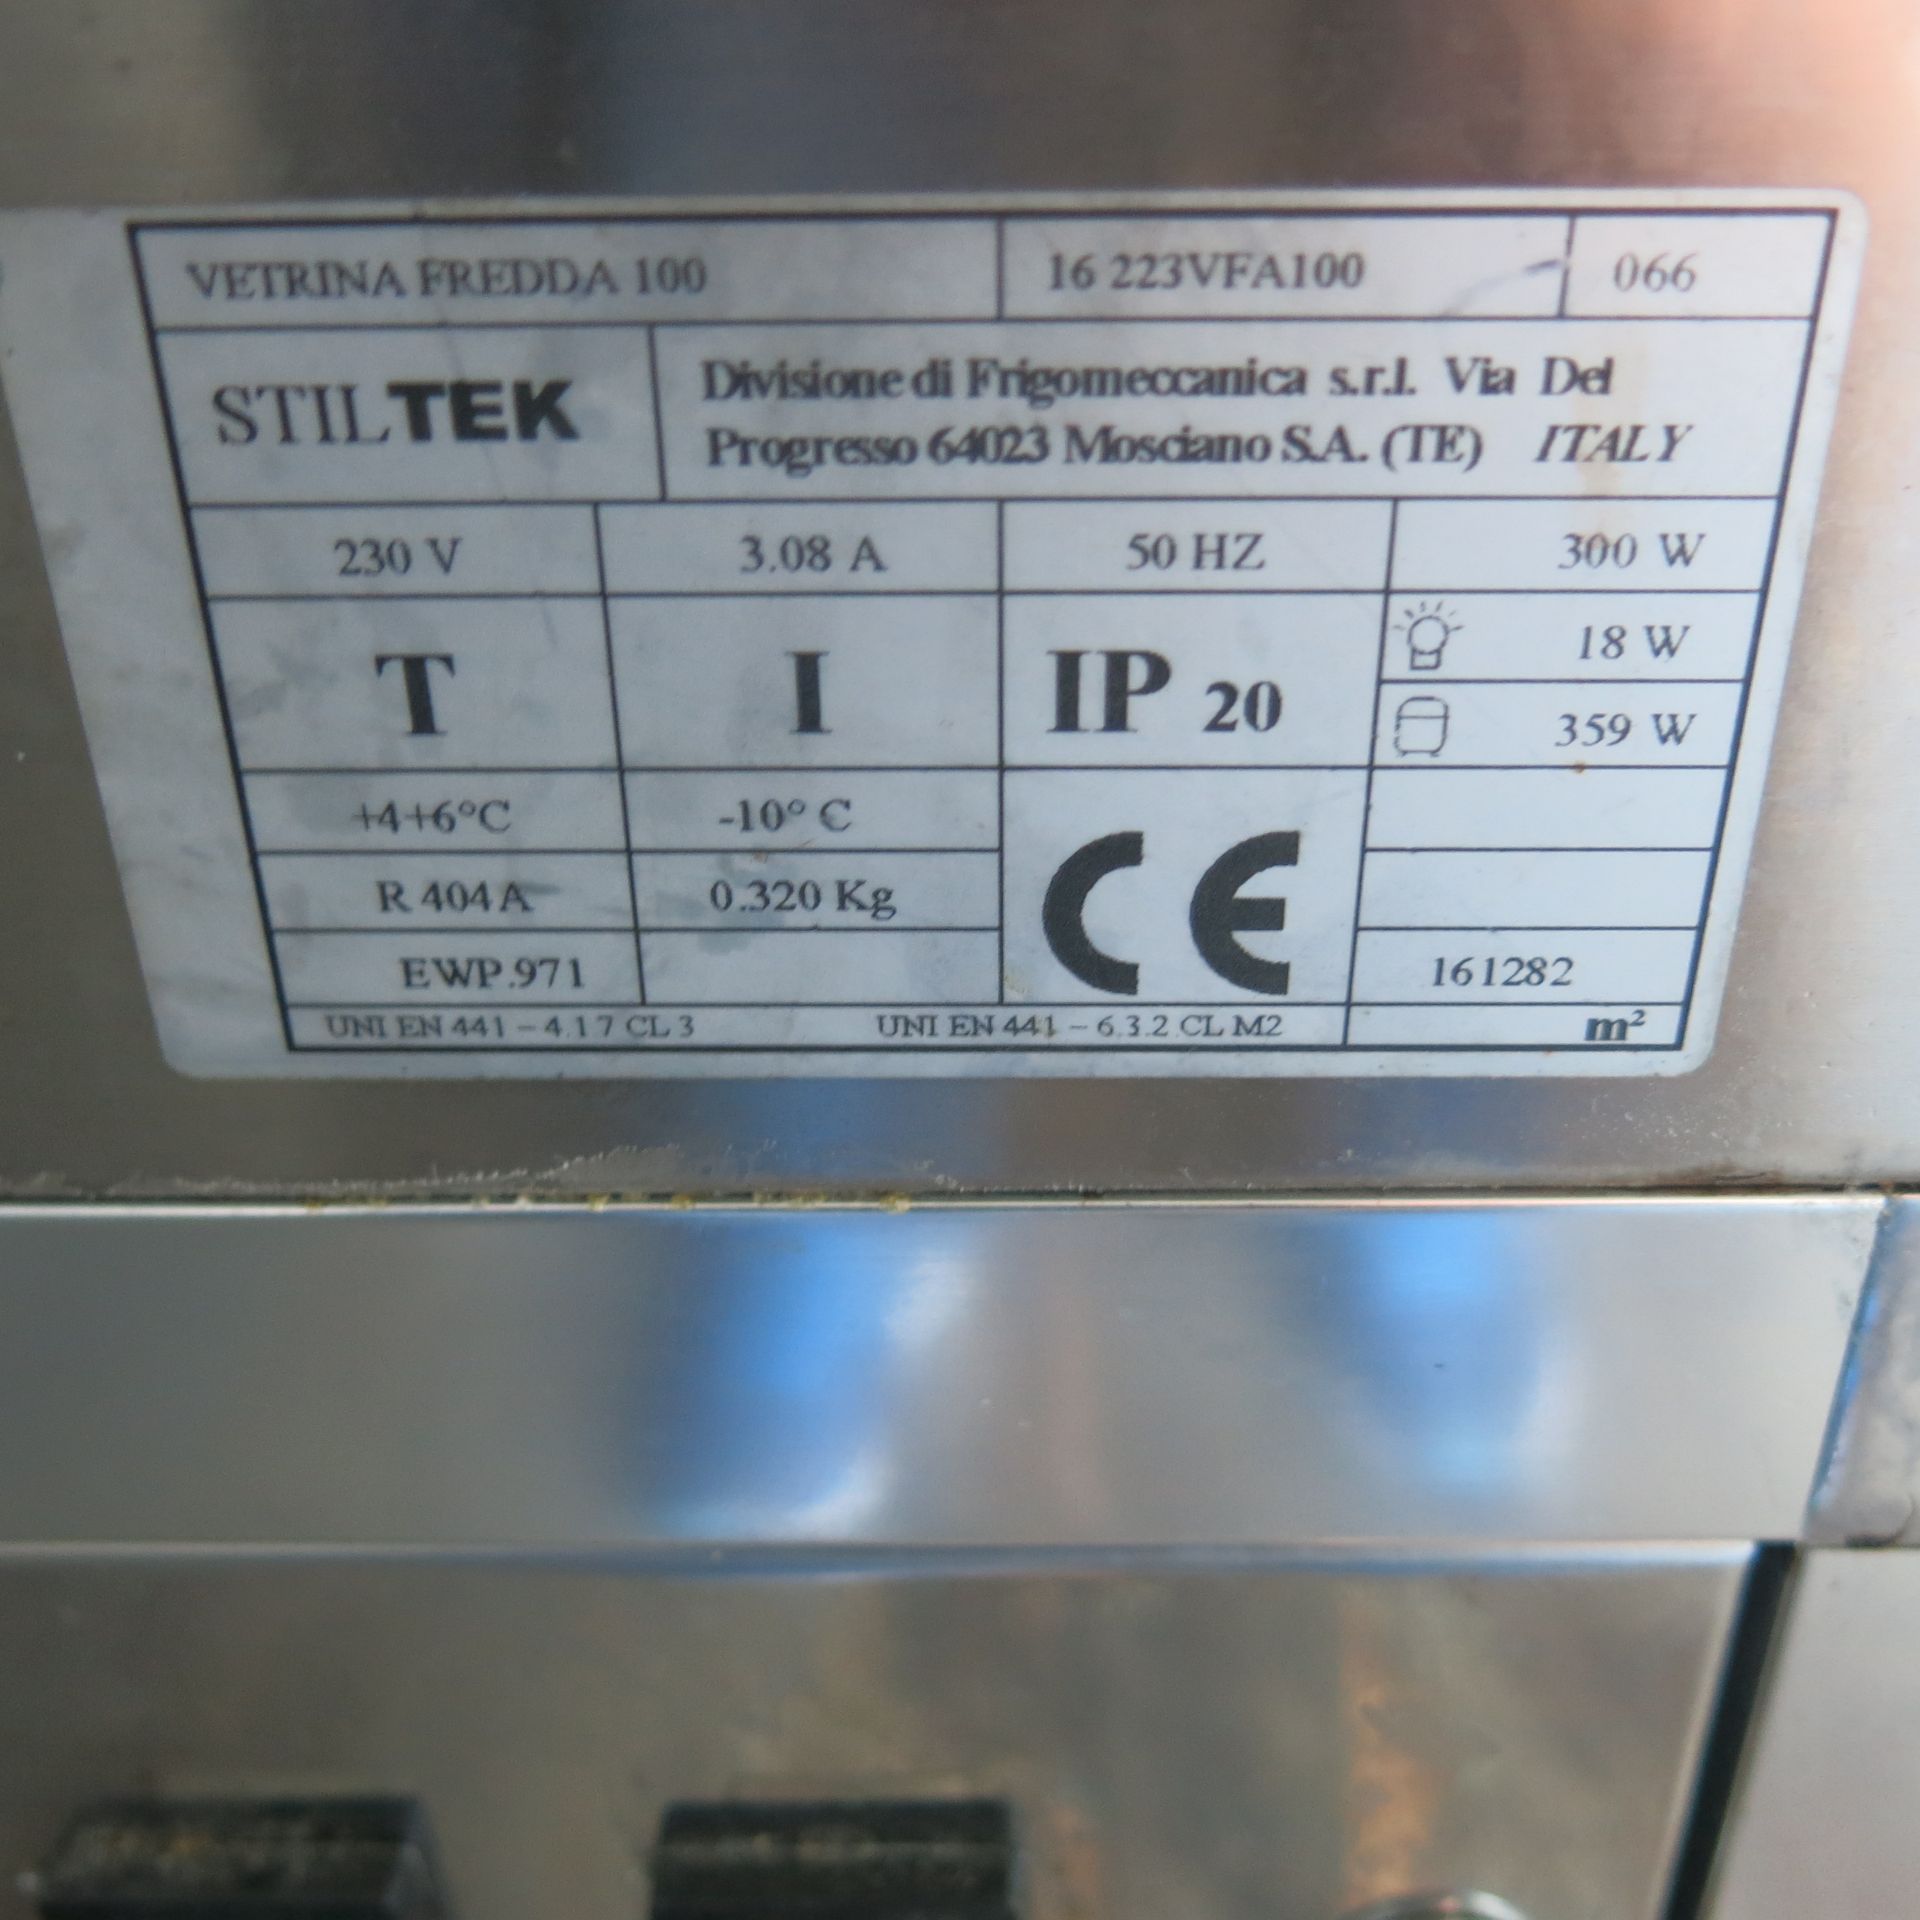 Stiltek Illuminated Glass Fronted Refrigerated Display Chiller, Model VETRINA FREDDA 100. Comes with - Image 3 of 6